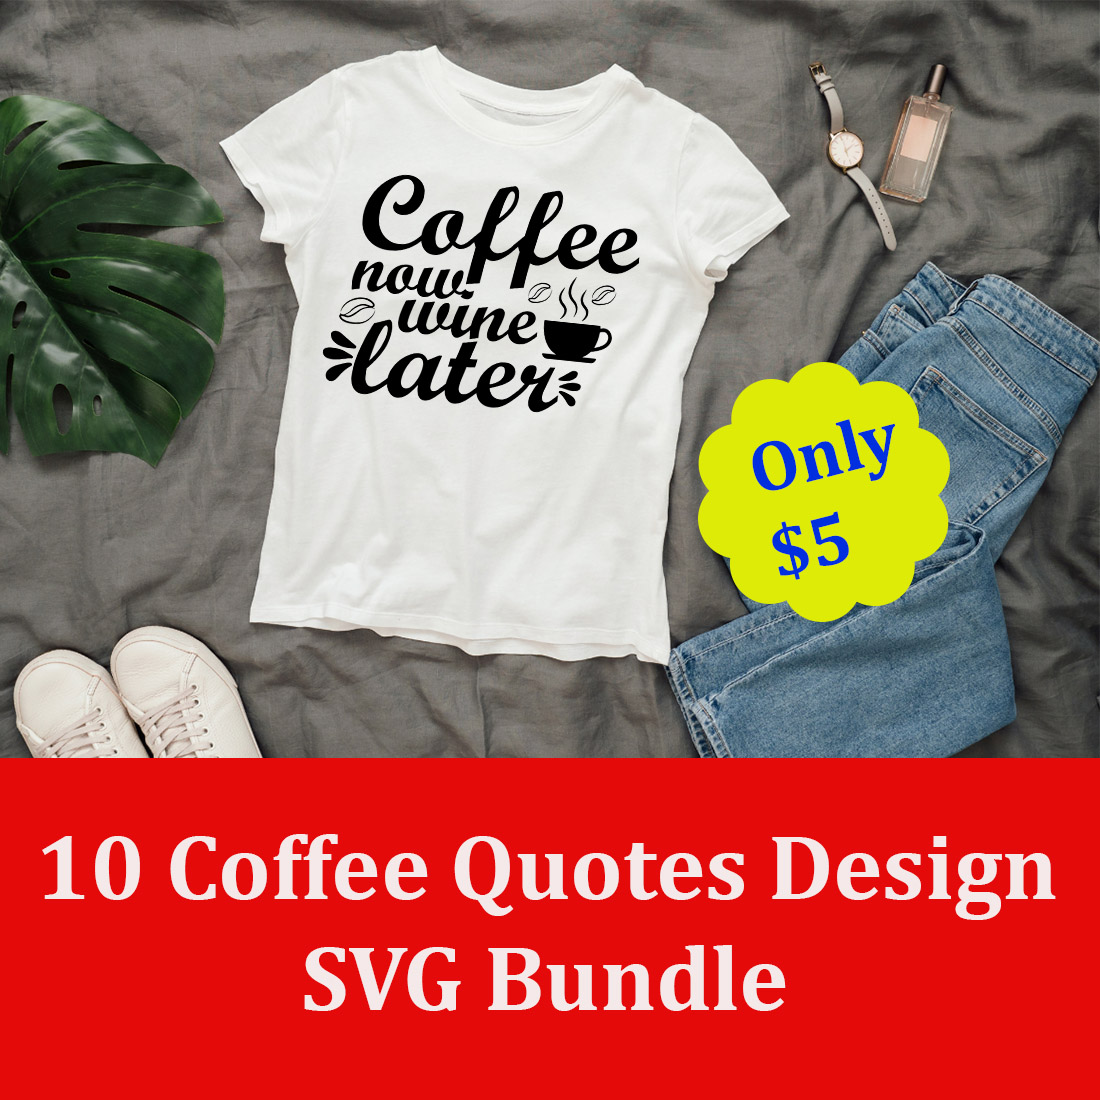 Image of a white t-shirt with an elegant inscription Coffee now wine later